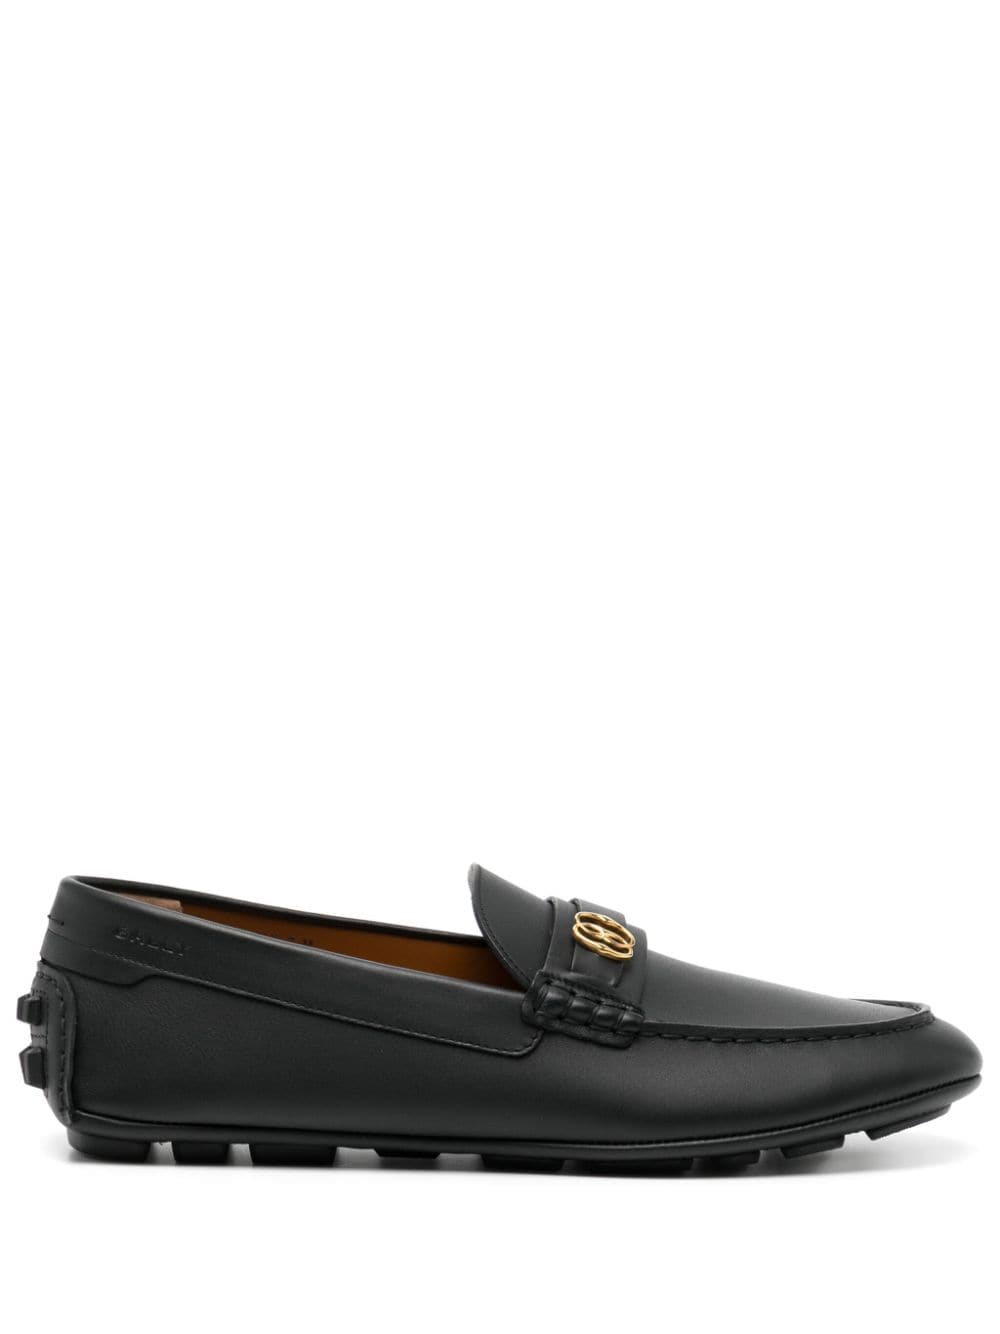 Bally Emblem-plaque leather driving shoes - Nero